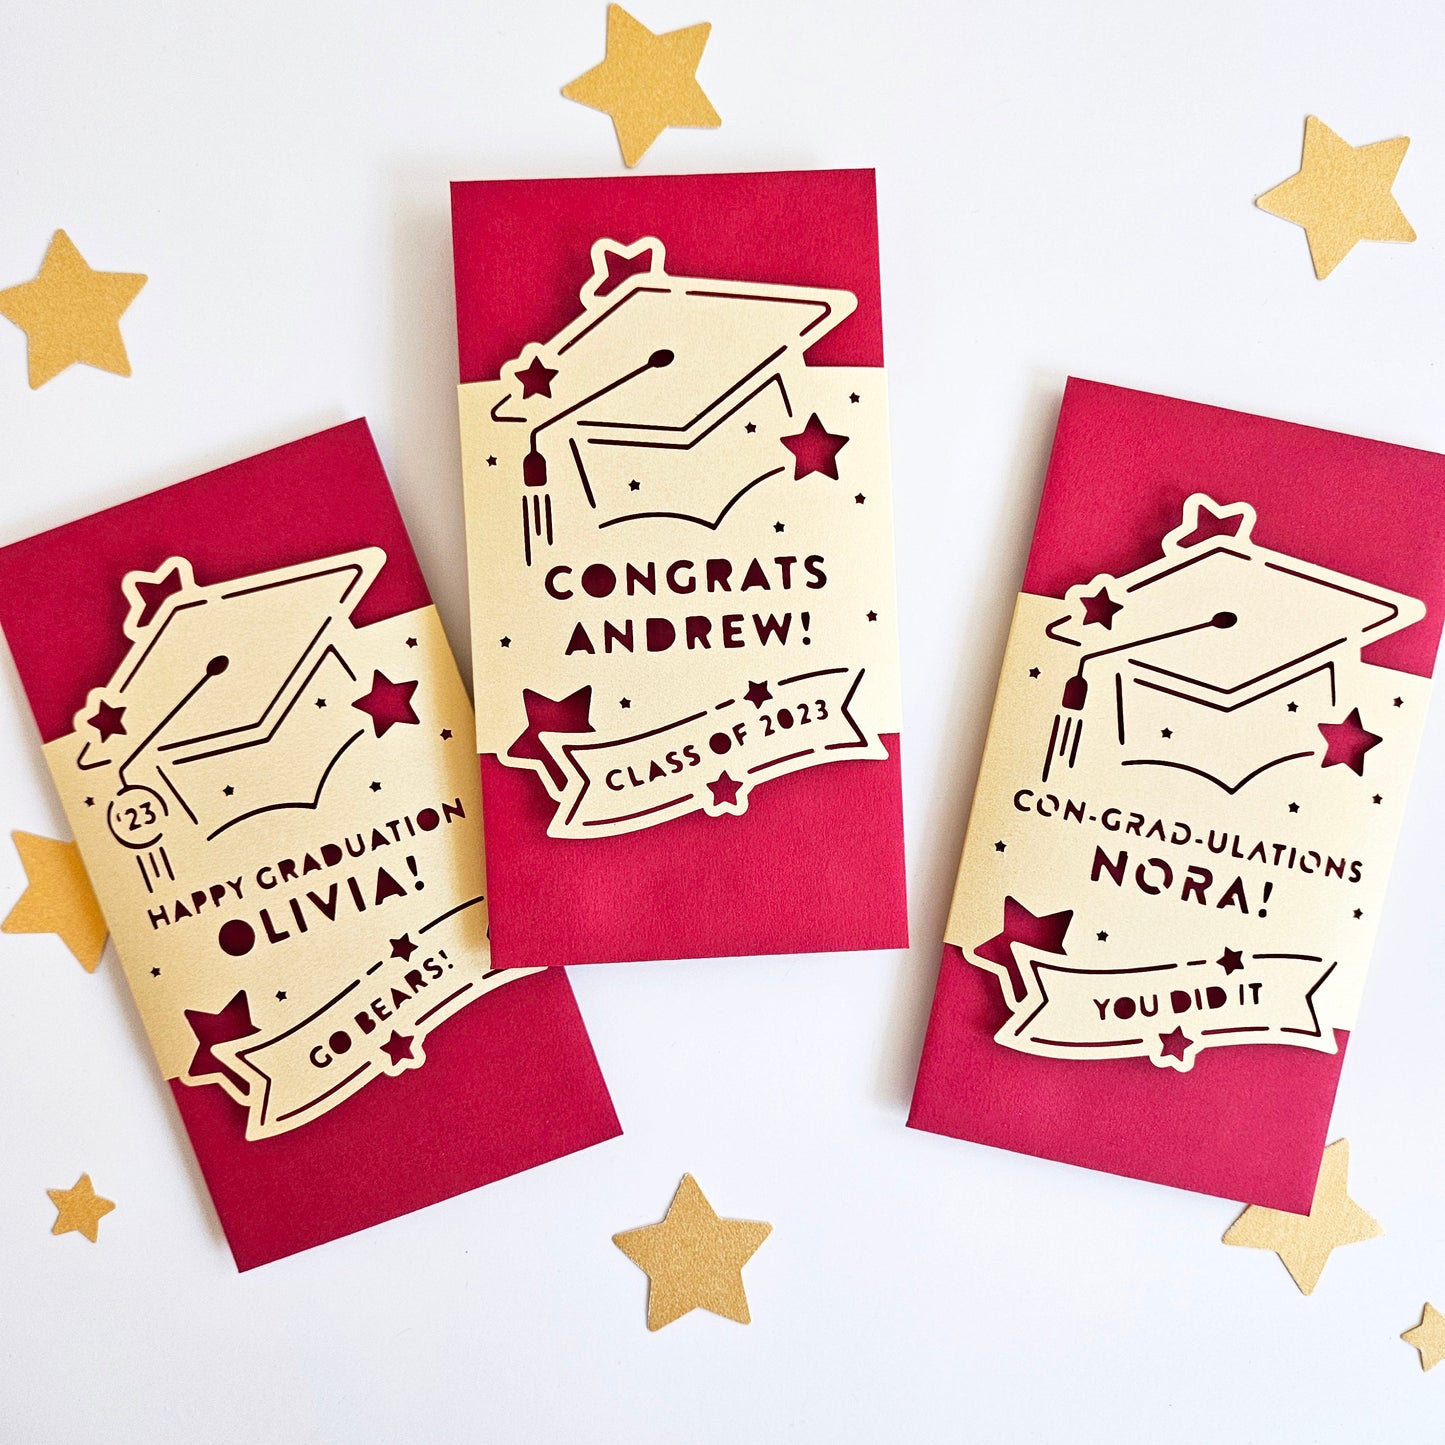 Happy Graduation Red Envelope, personalized